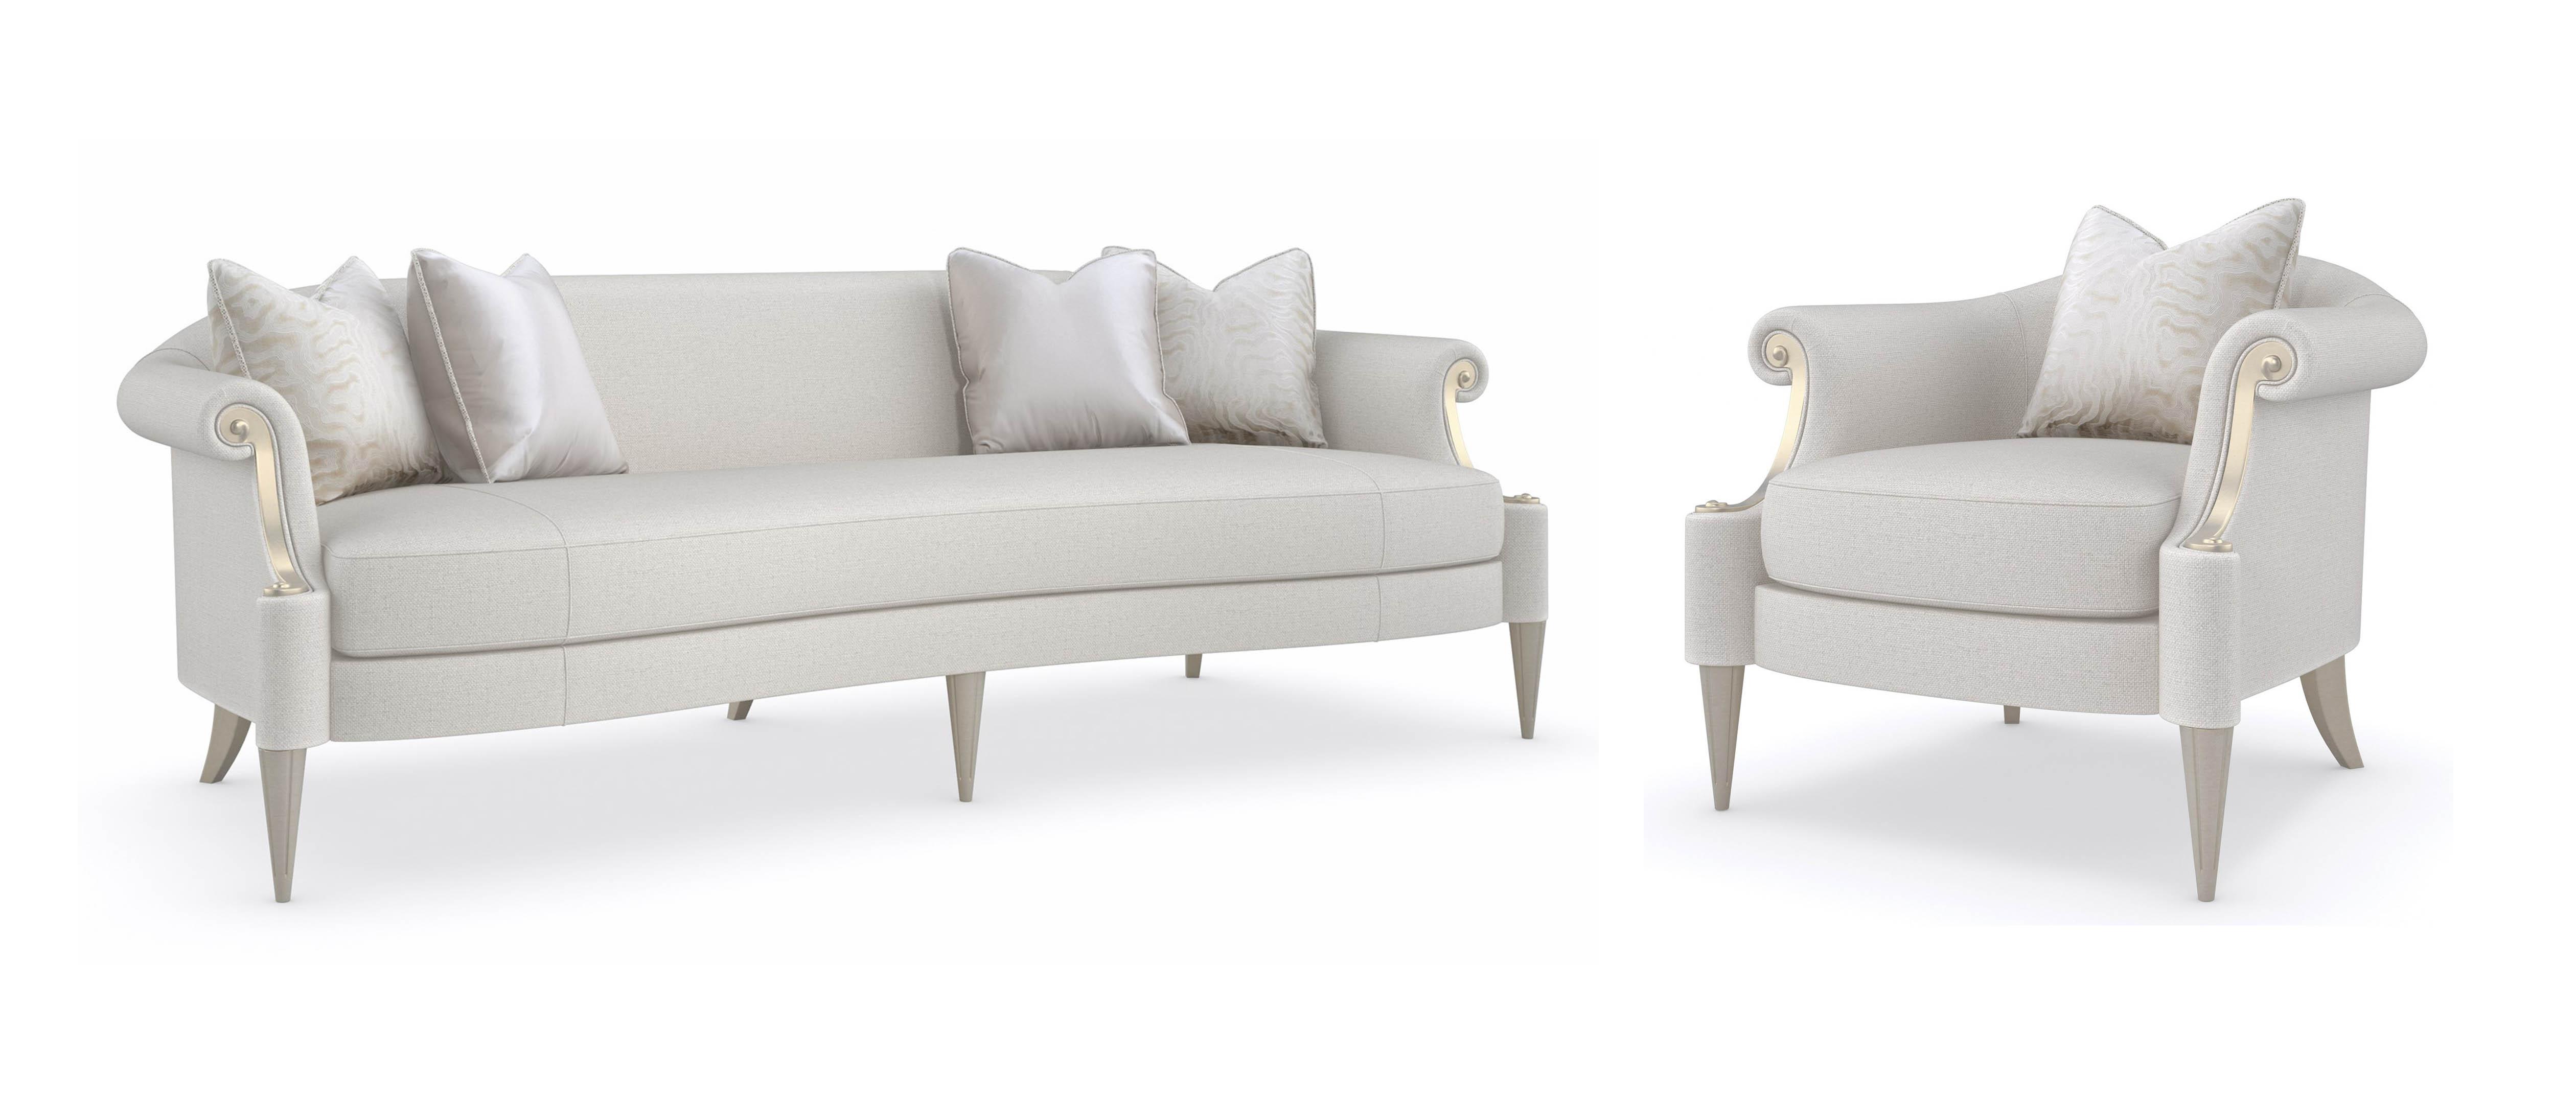 Traditional Sofa and Chair LILLIAN C090-020-011-A C090-020-032-A in Taupe, Silver Fabric